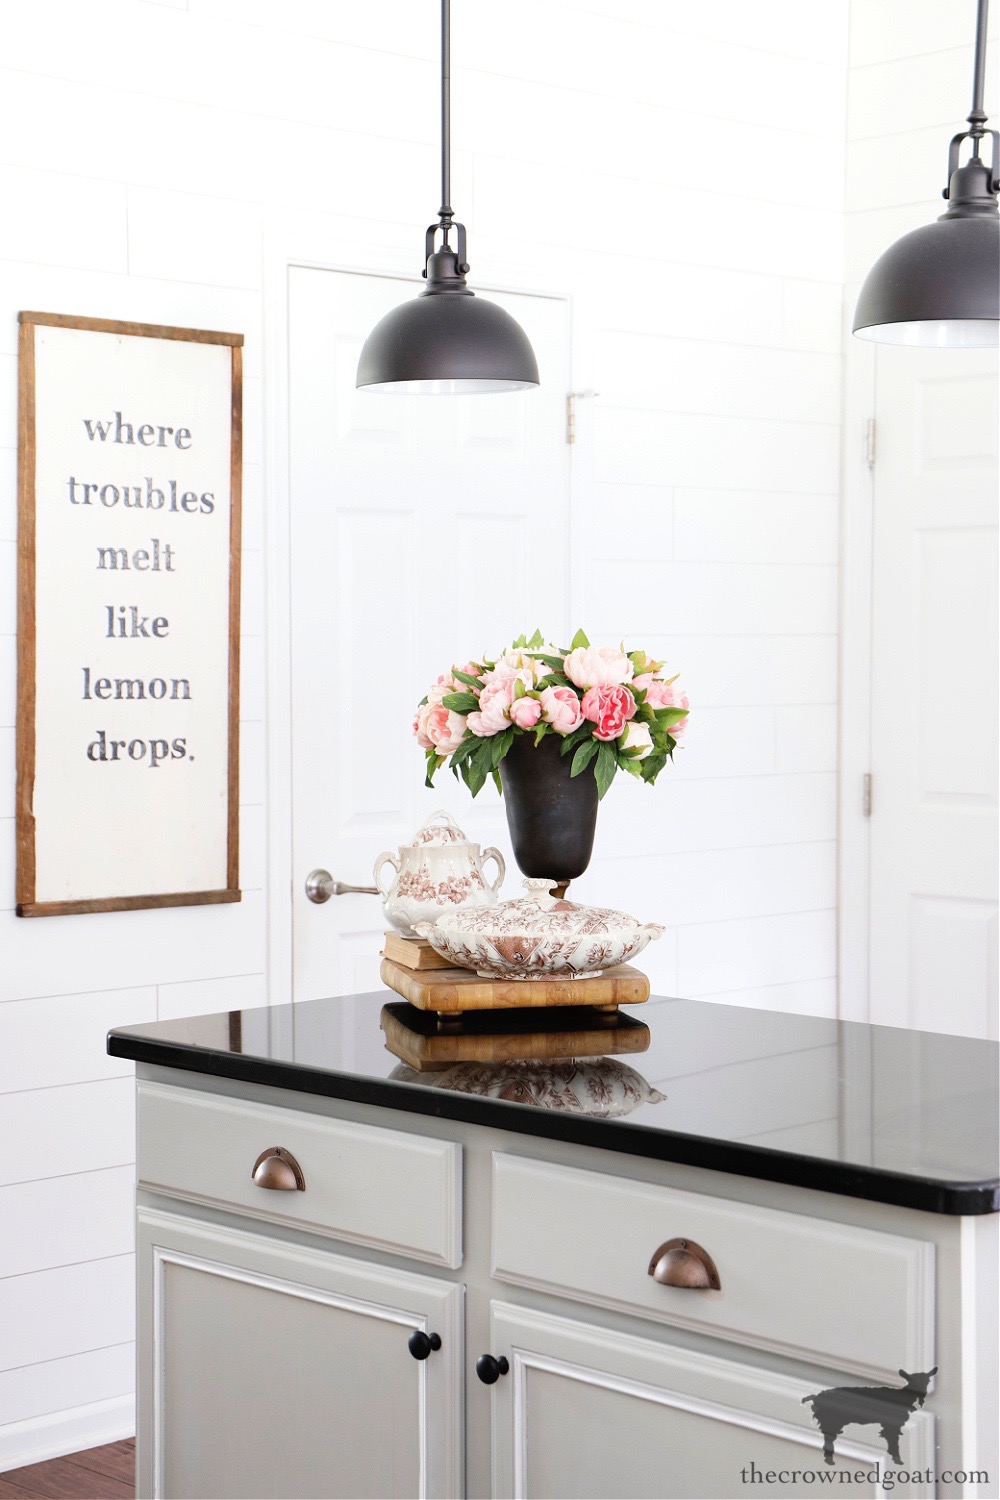 11 Ways to Clean, Organize and Maintain a Tidy Kitchen-The Crowned Goat